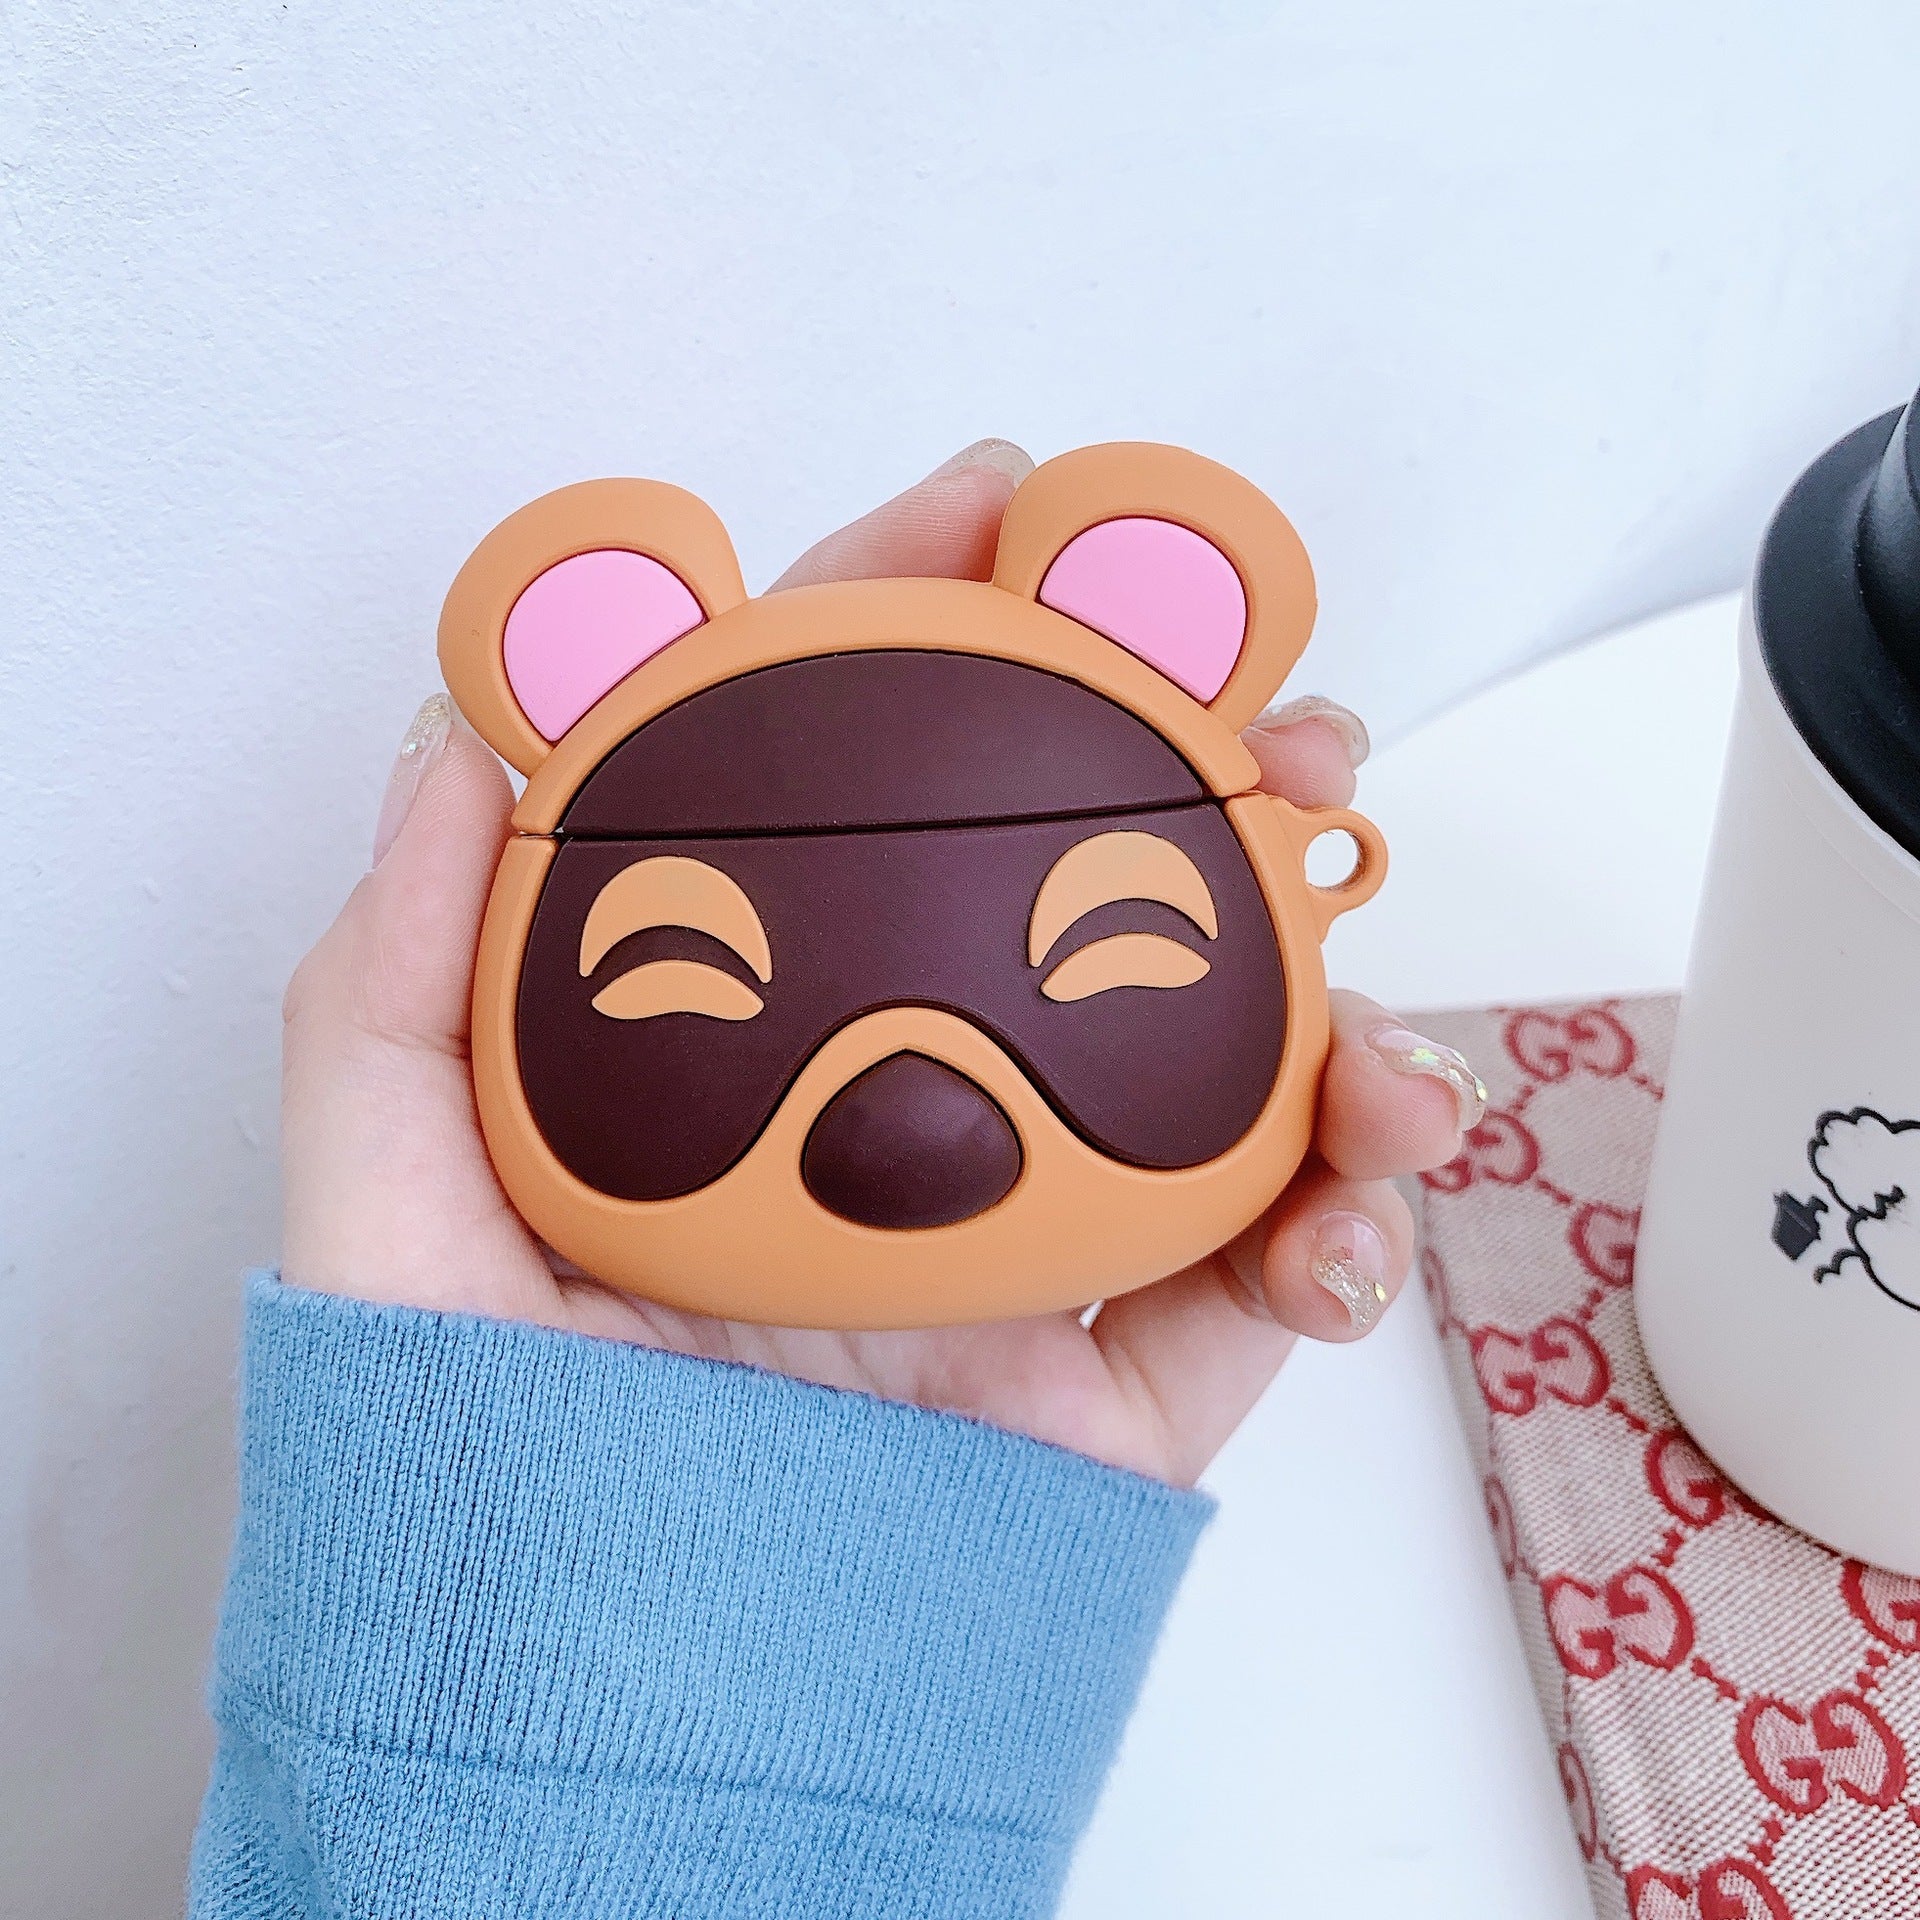 🍃 Animal Crossing Airpod and Airpod Pro SiliconeCases - AzraTec